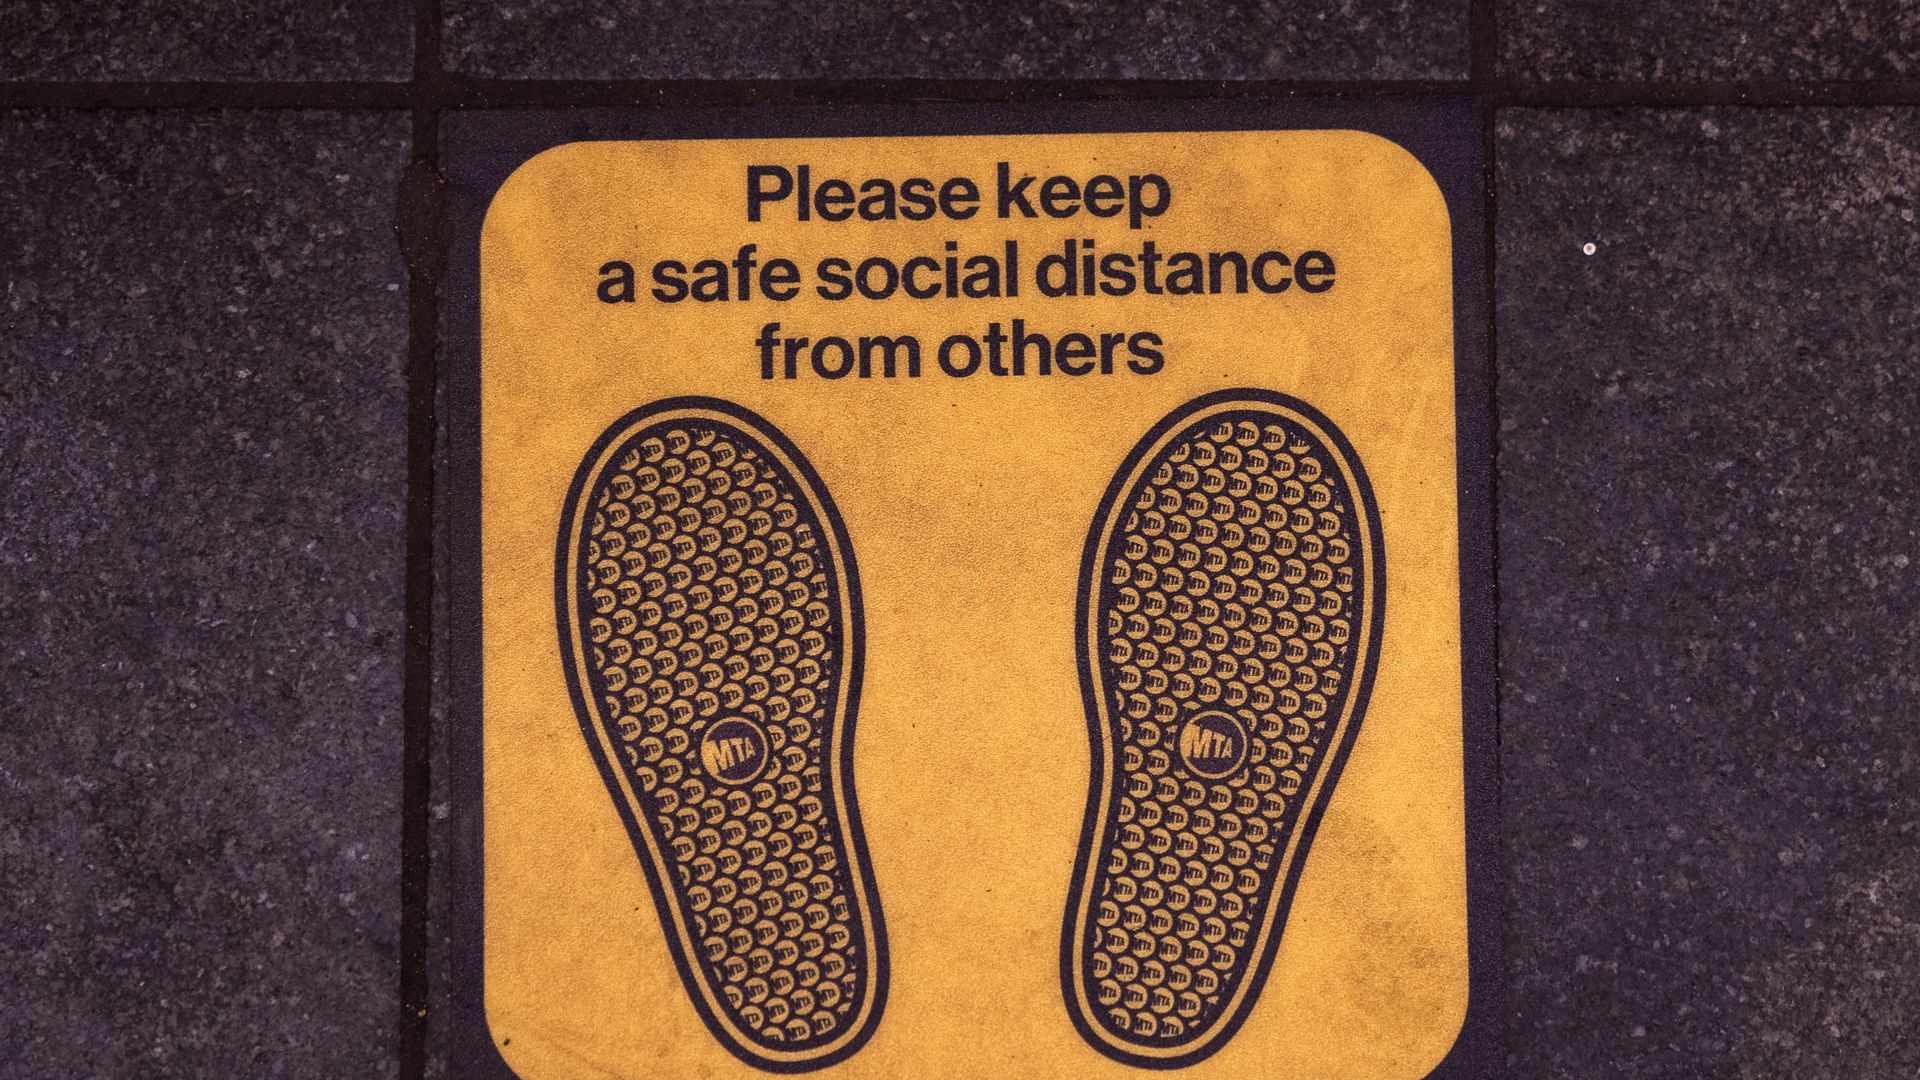  Signage on the floor of the Times Square subway platform asks commuter to maintain a safe social distance